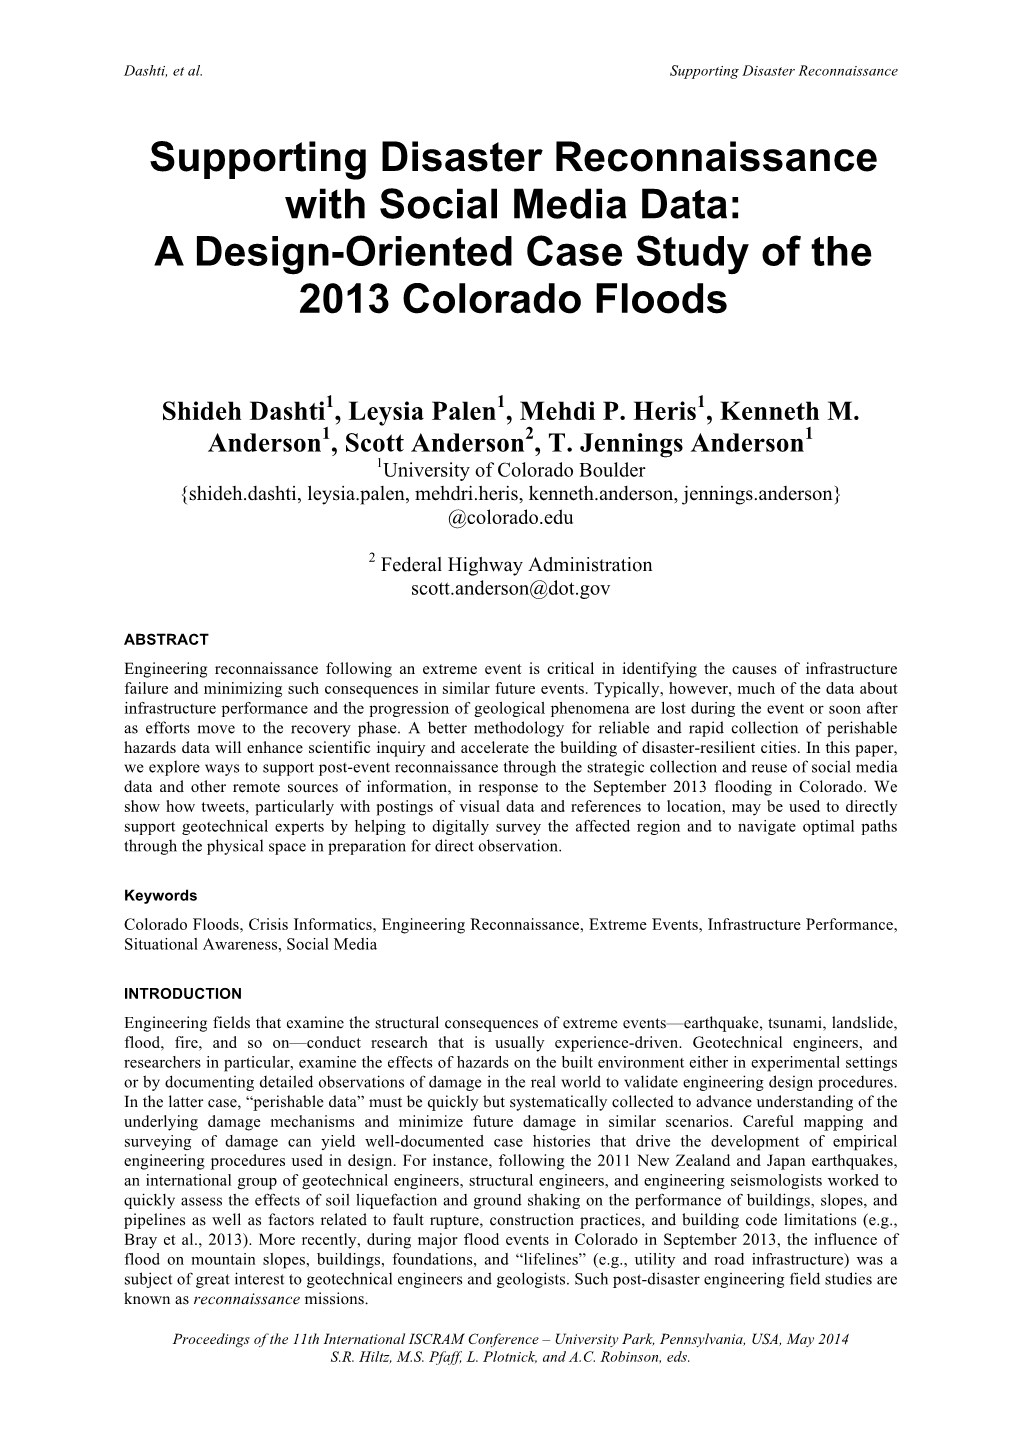 Supporting Disaster Reconnaissance with Social Media Data: a Design-Oriented Case Study of the 2013 Colorado Floods